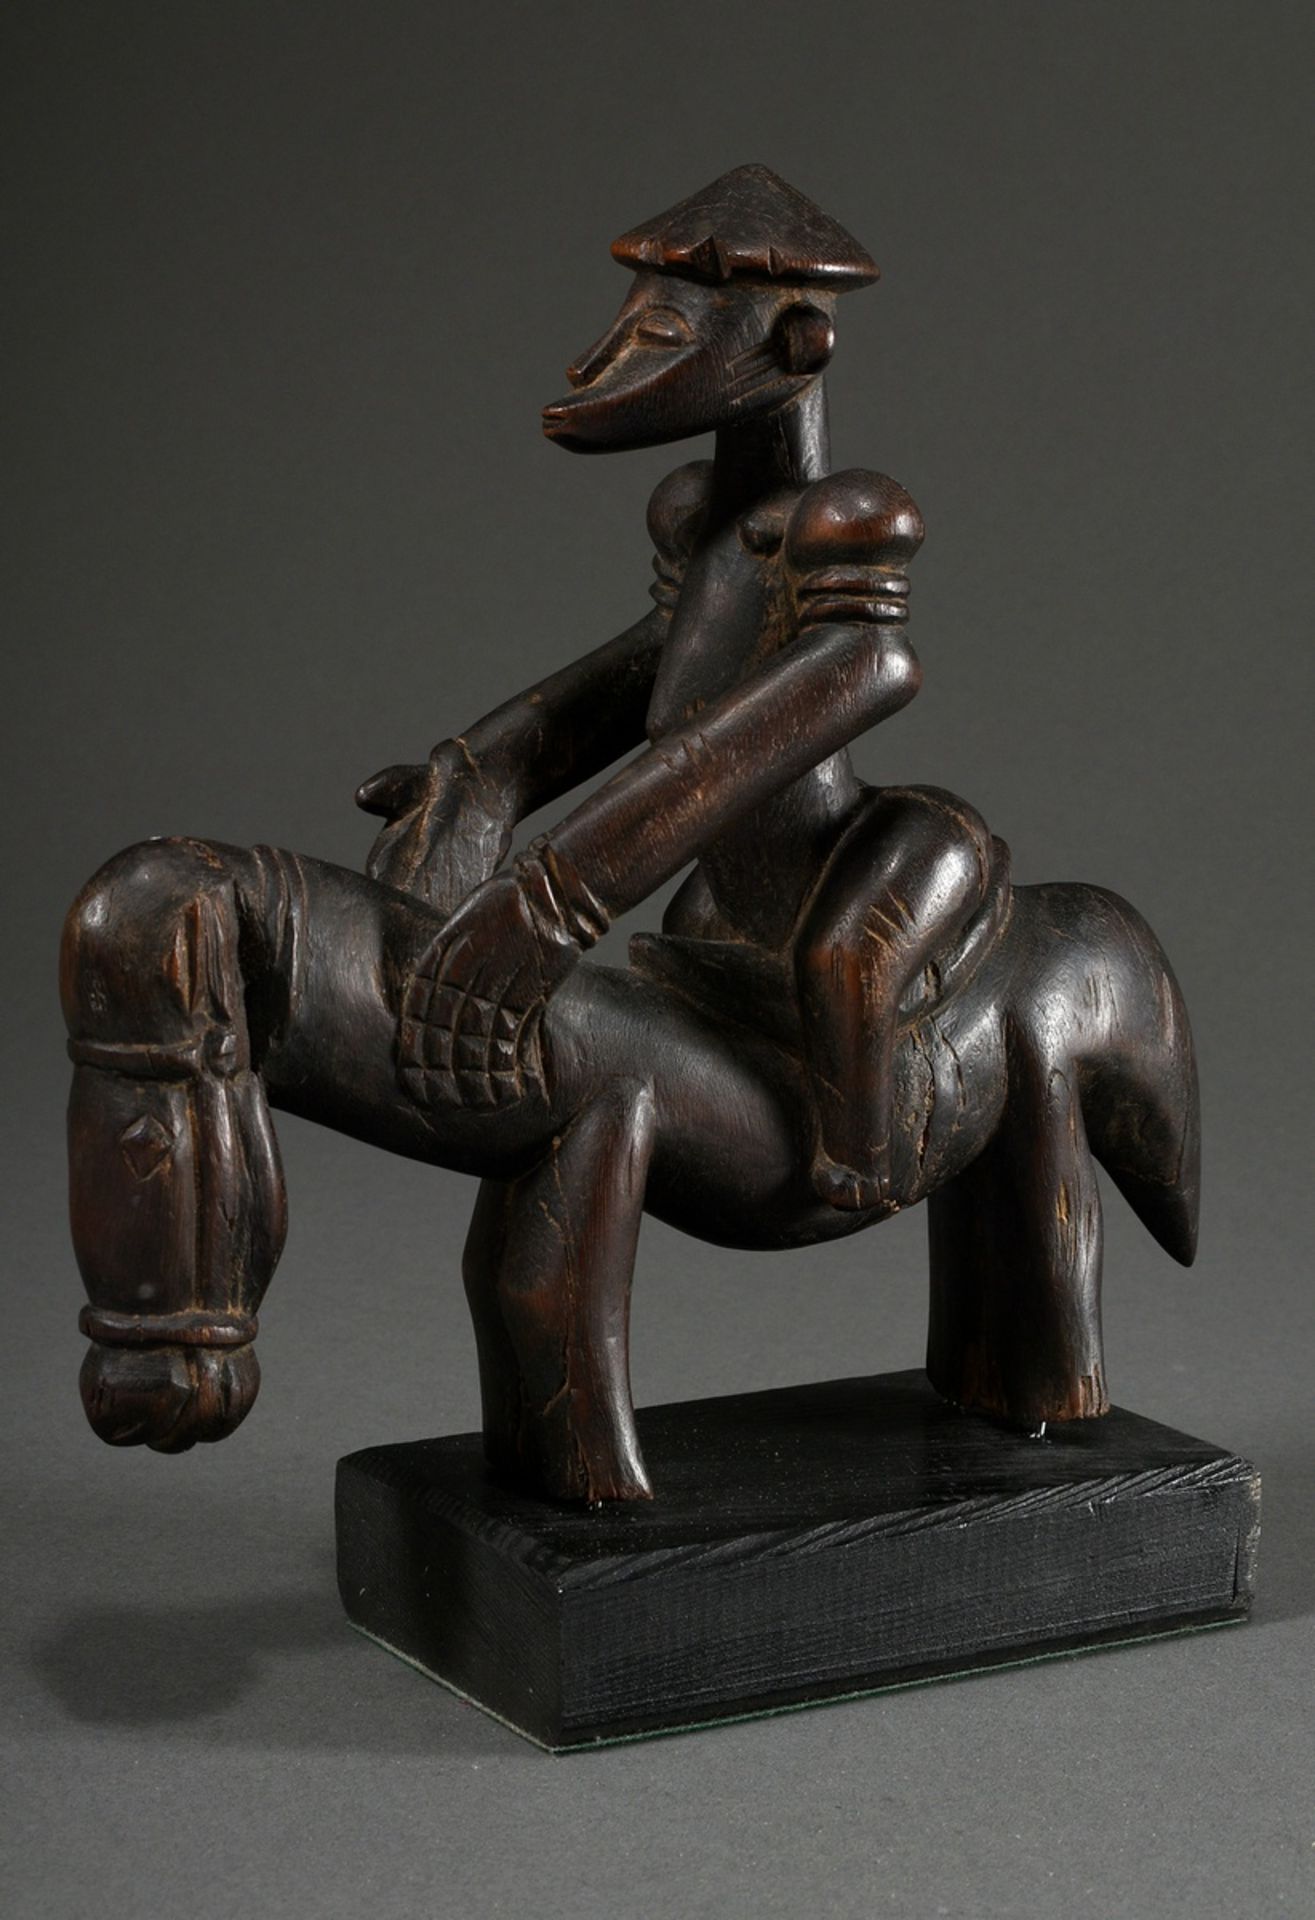 Equestrian statuette of a muscular figure with pointed headgear and scarification marks on the body